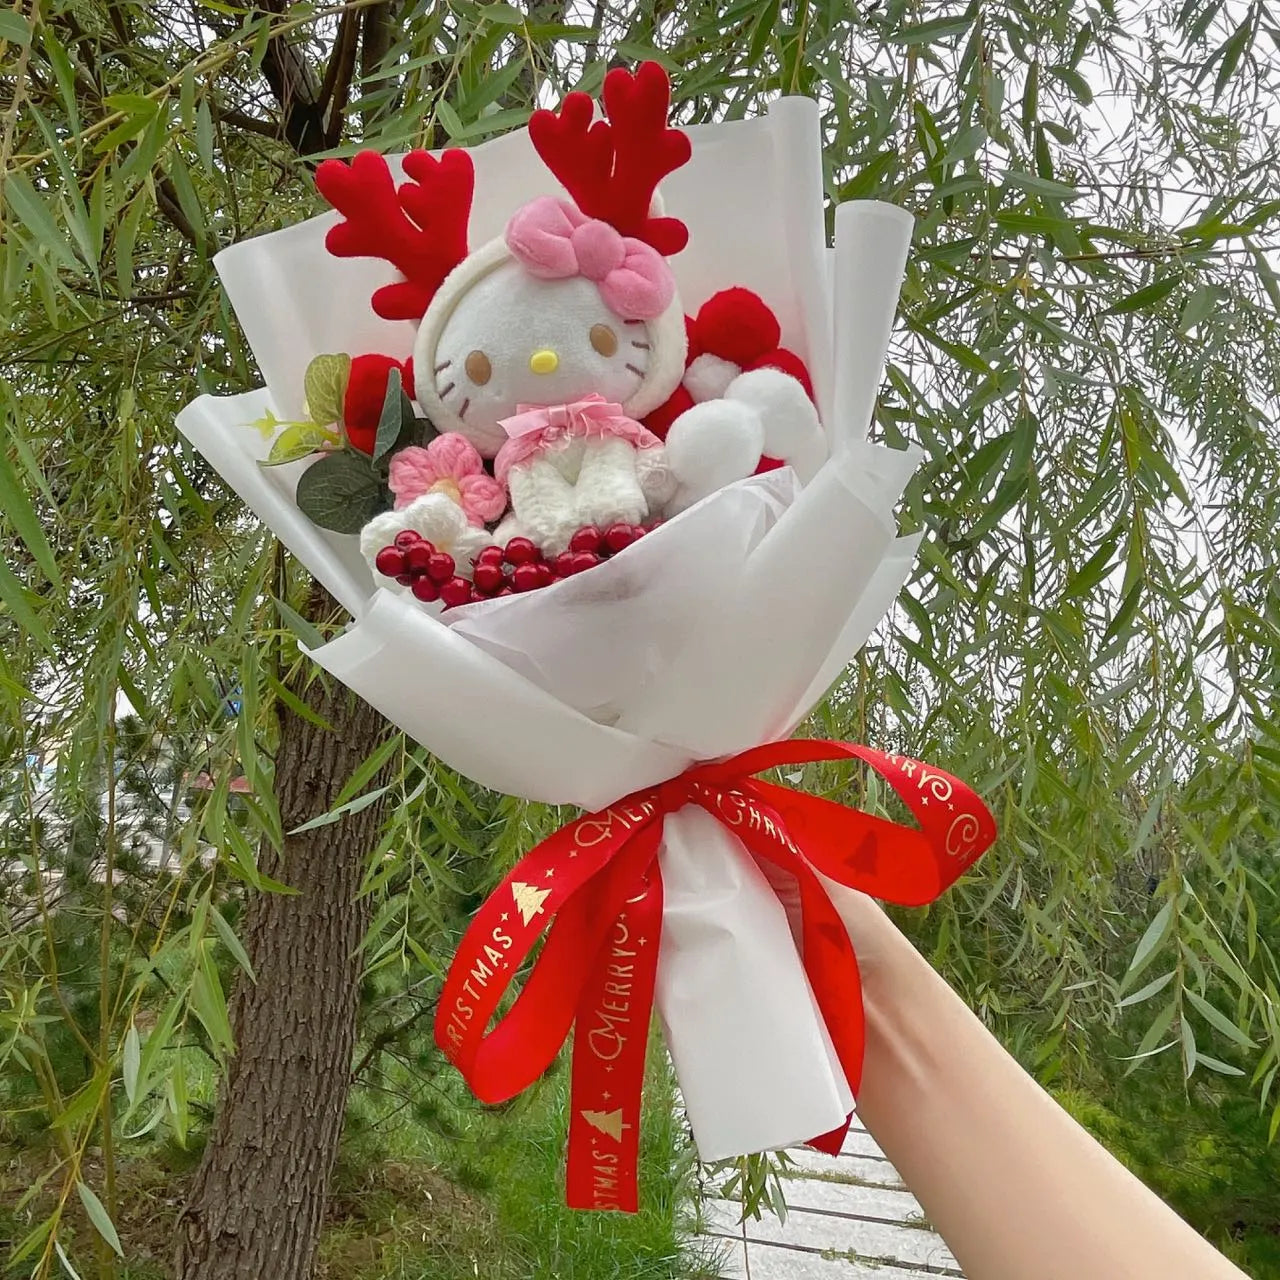 Blooming Plush Bouquet - Kawaii Stop - Cartoon Characters, Christmas Gift, Creative Bouquet, Creative Gift, Cuddly Bouquet, Cute Plush Dolls, Gift for All Ages, Graduation Gift, Memorable Surprise, Plush Bouquet, Soft and Huggable, Special Occasion, TAKARA TOMY, Unique Present, Valentine's Day